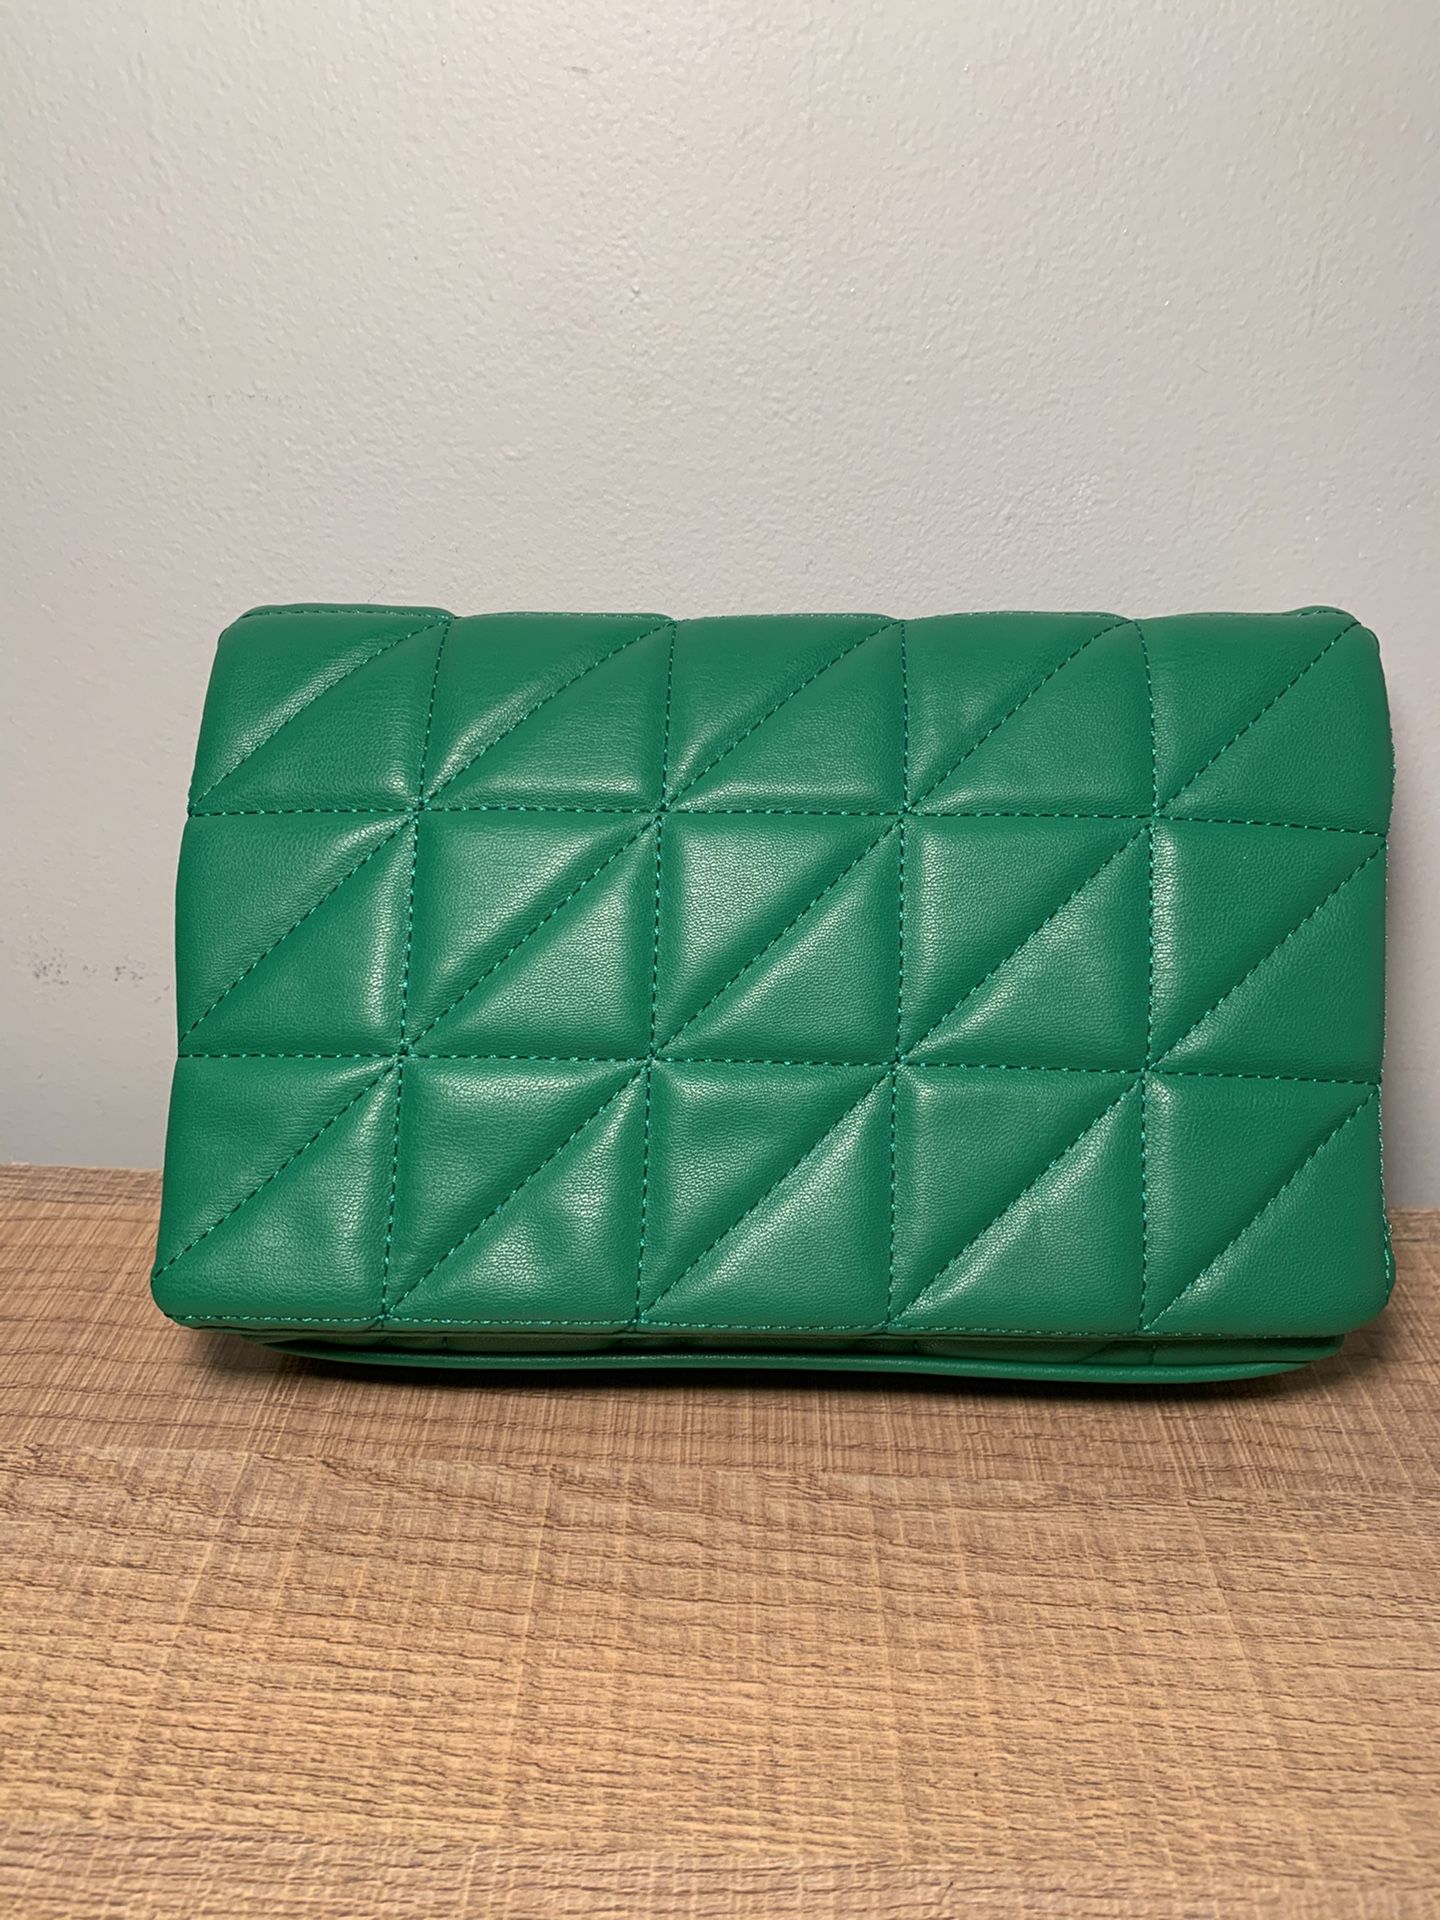 Green Purse From  for Sale in Hauppauge, NY - OfferUp